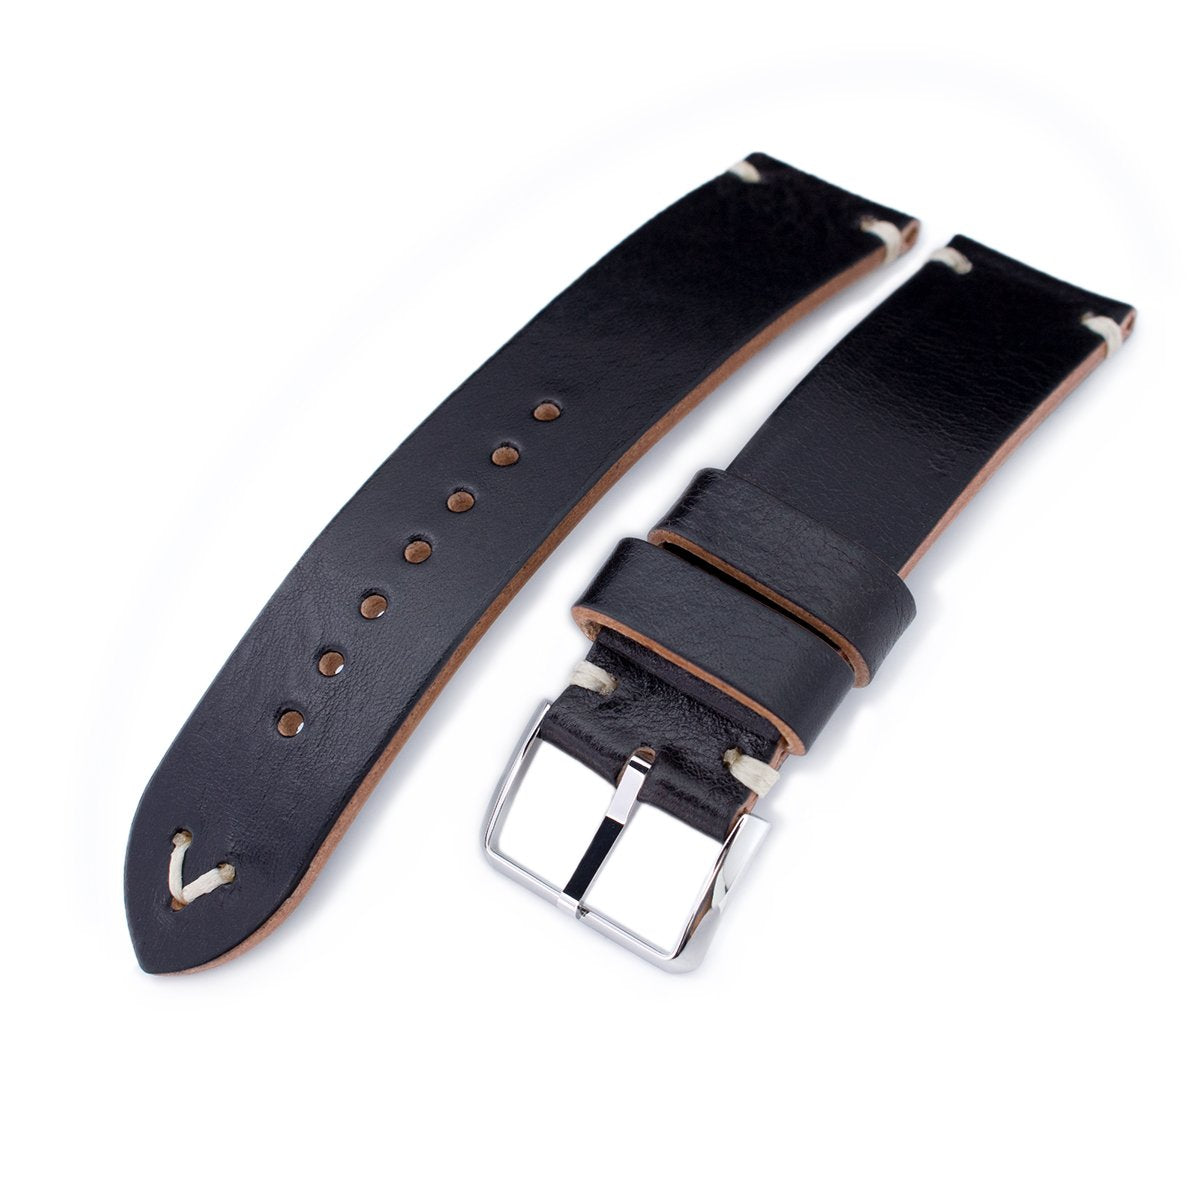 20mm 21mm 22mm MiLTAT Black Genuine Calf Leather Watch Strap Beige Stitching Polished Buckle Strapcode Watch Bands